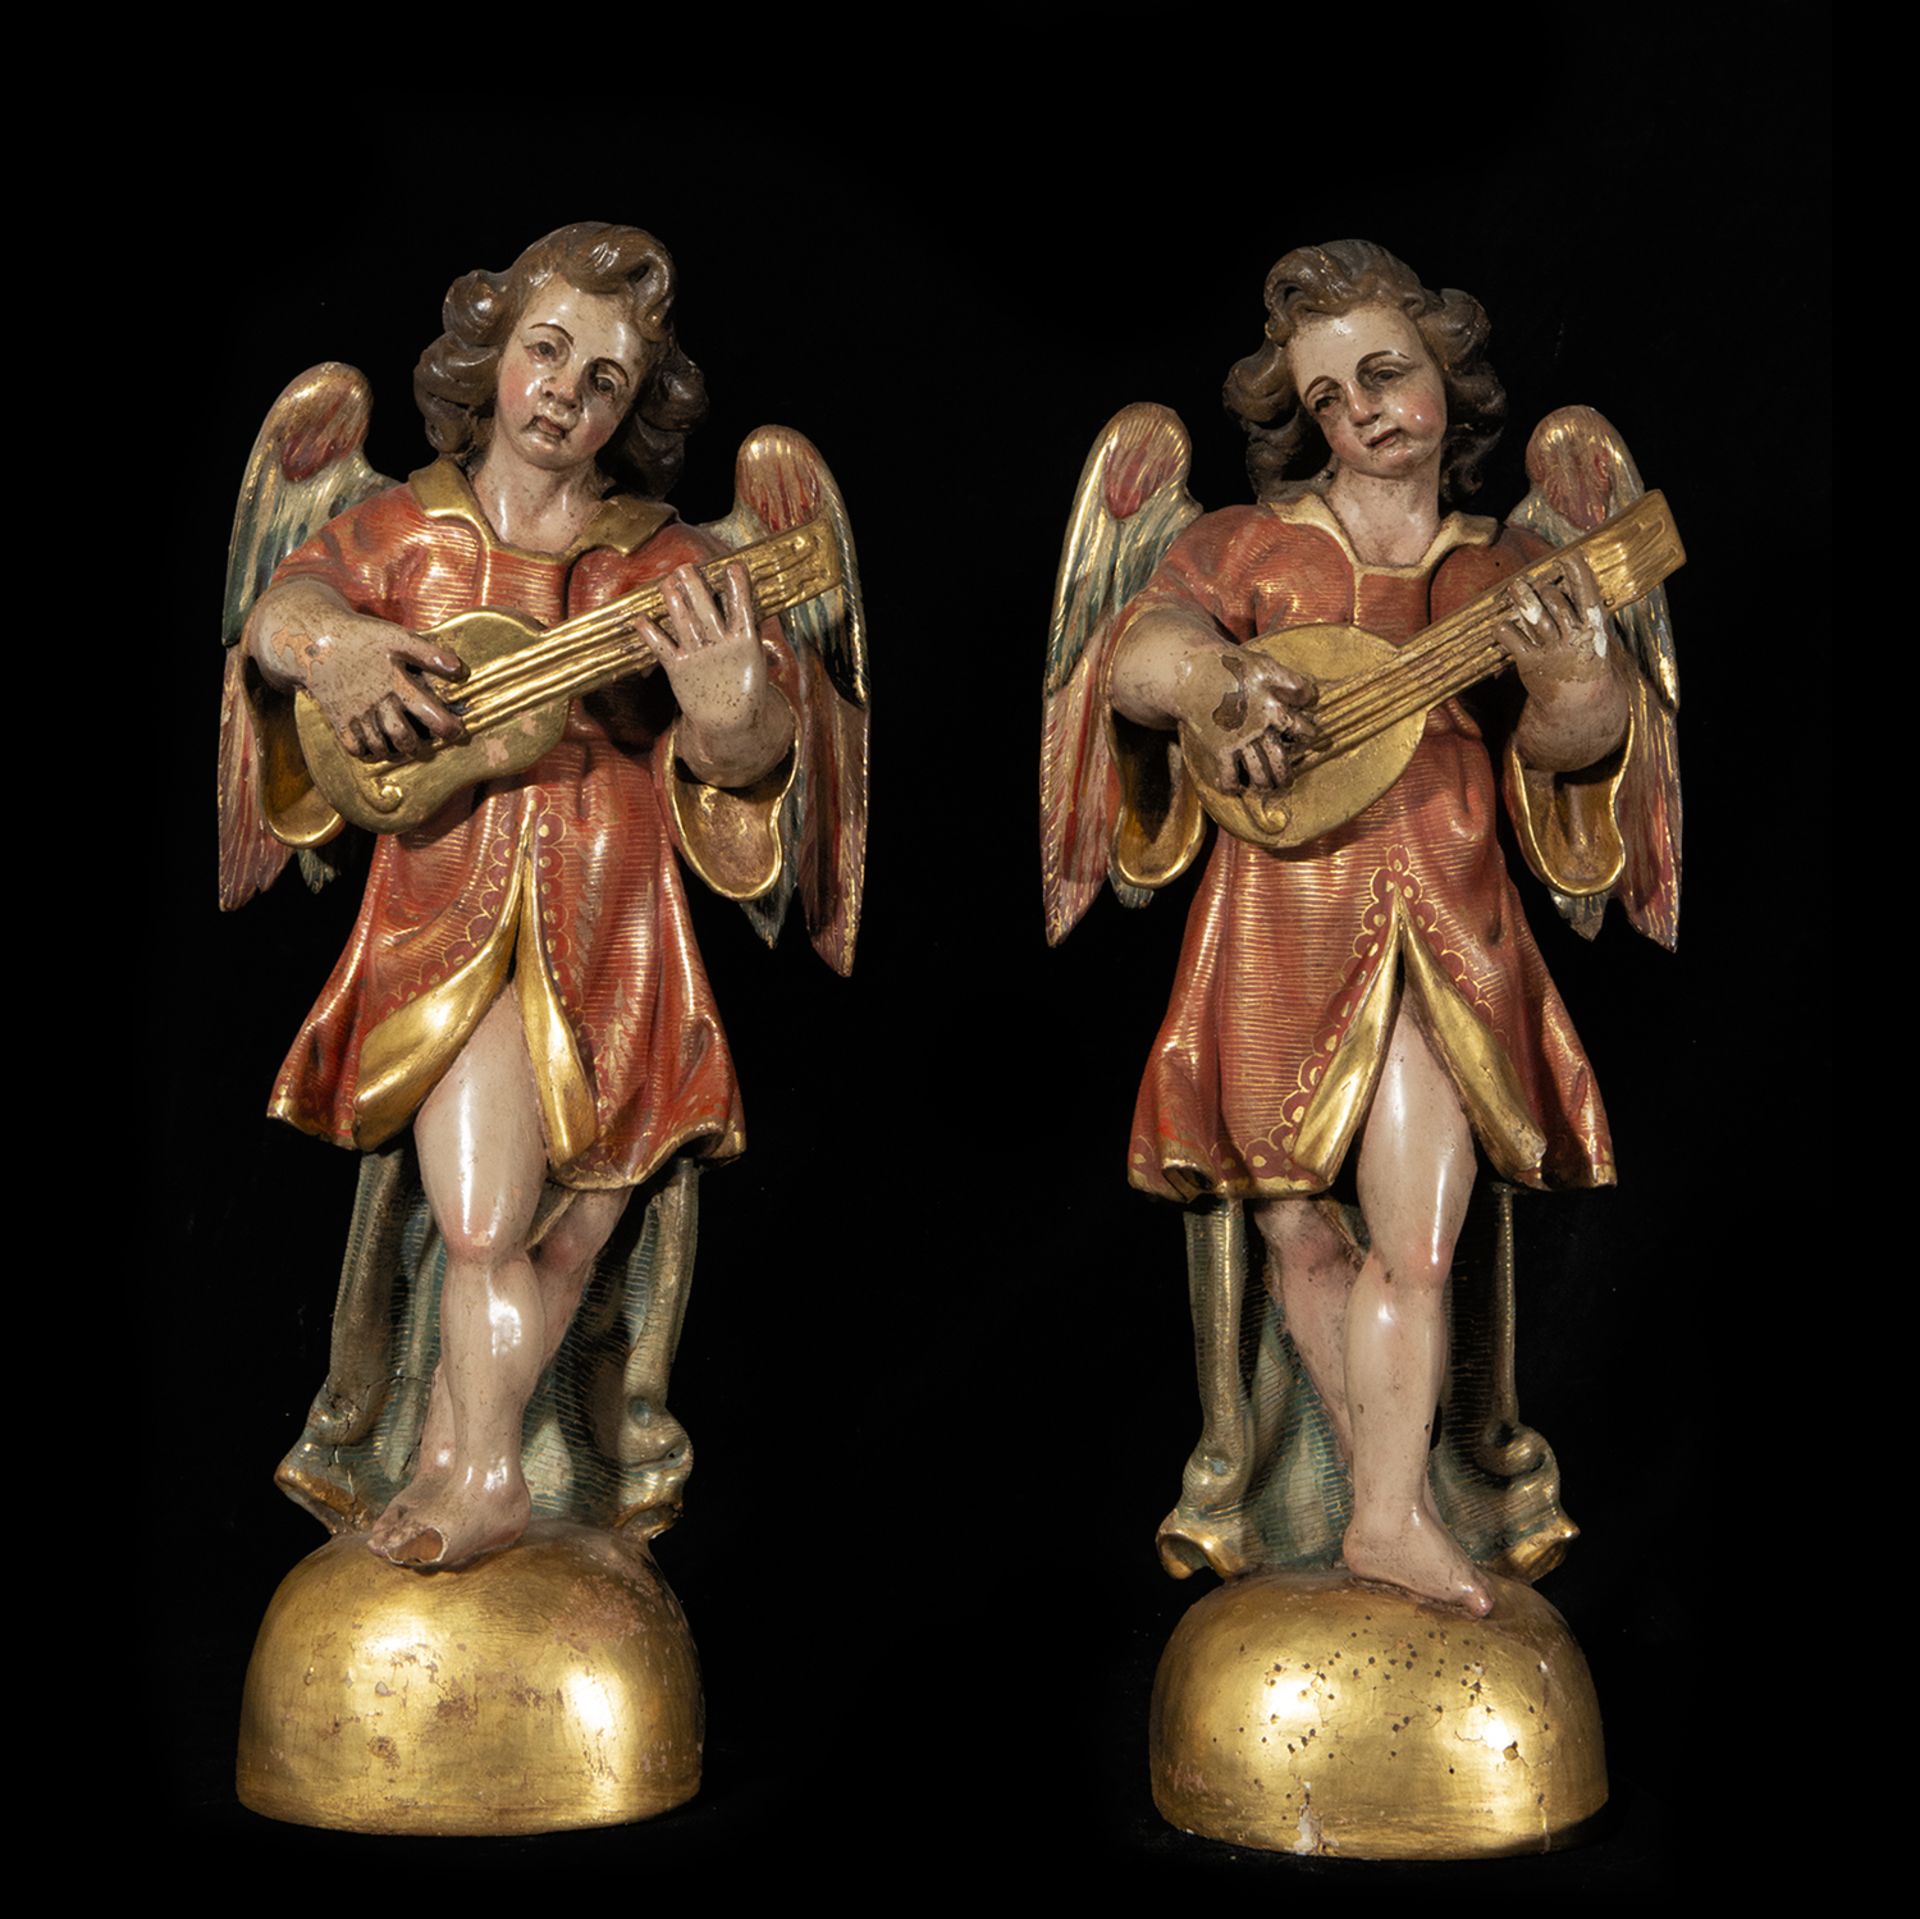 Pair of Elegant Portuguese or Sevillian Musician Angels from the late 16th century. Early 17th centu